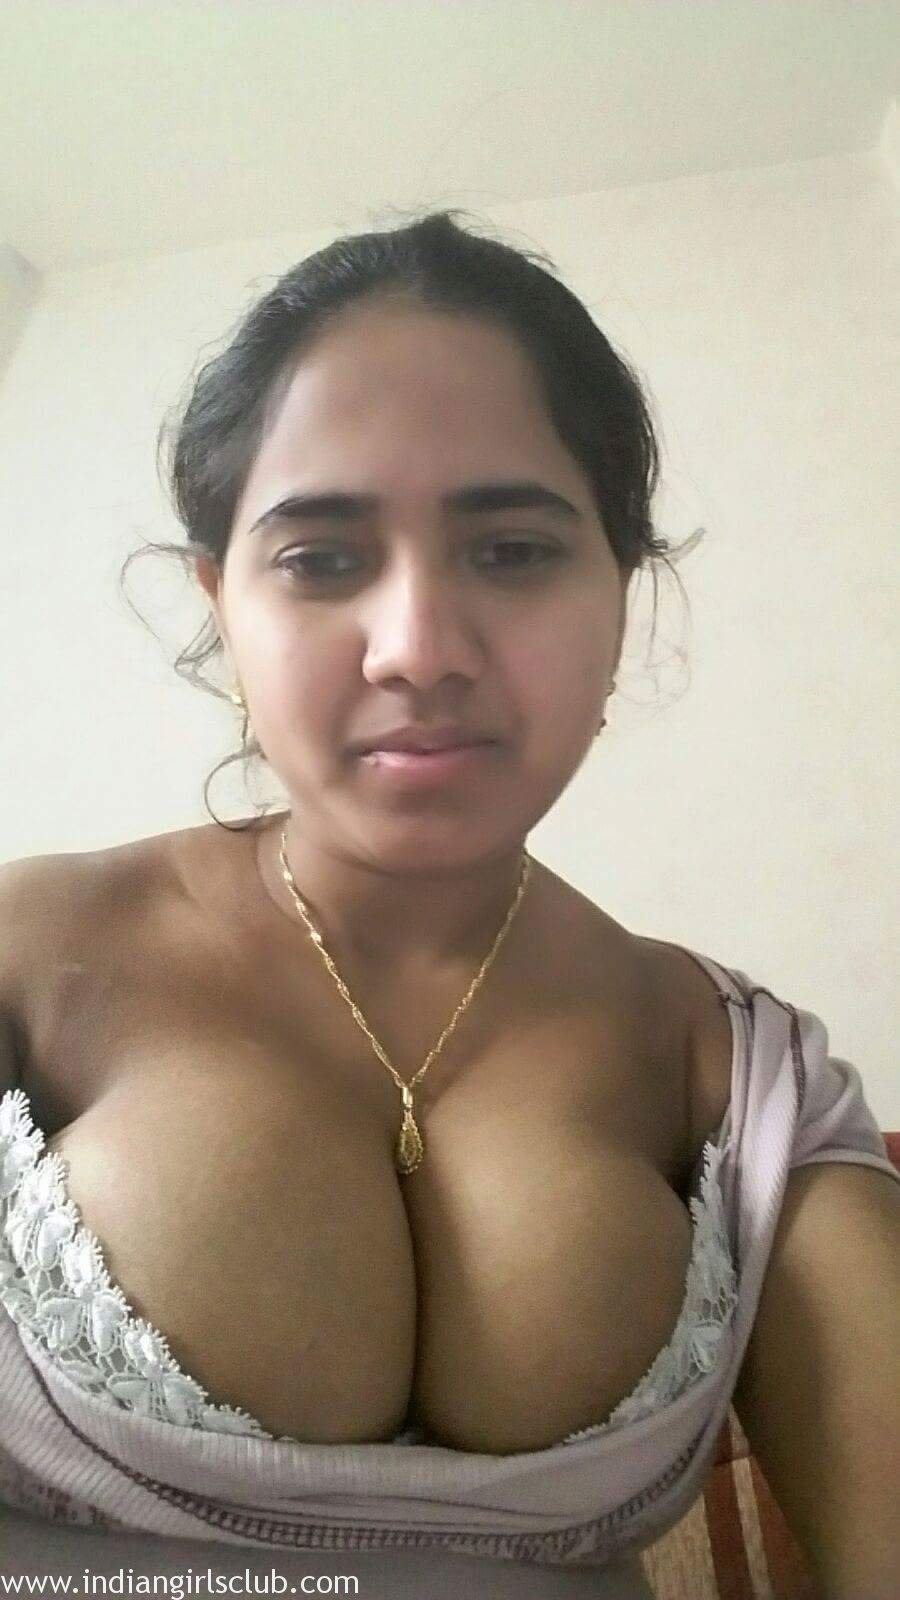 Cuttack Girl Showing asshole and Inserting finger.